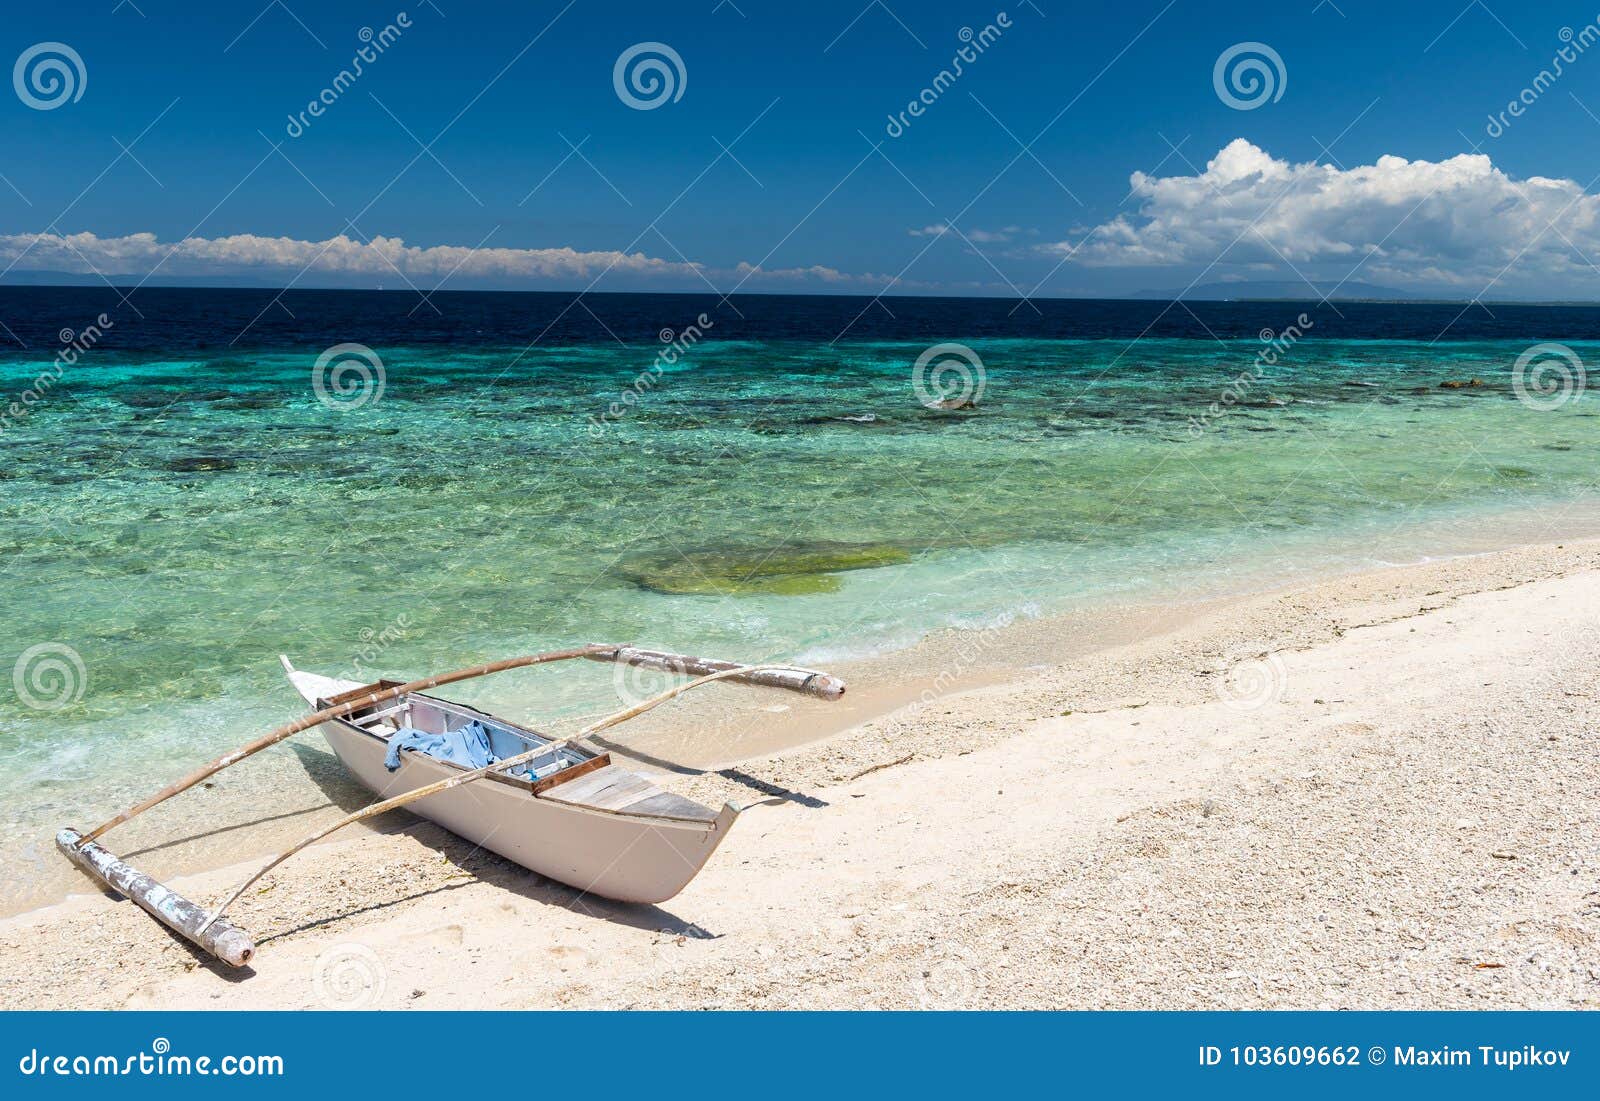 beautiful beach against seaview with boat at balicasag island